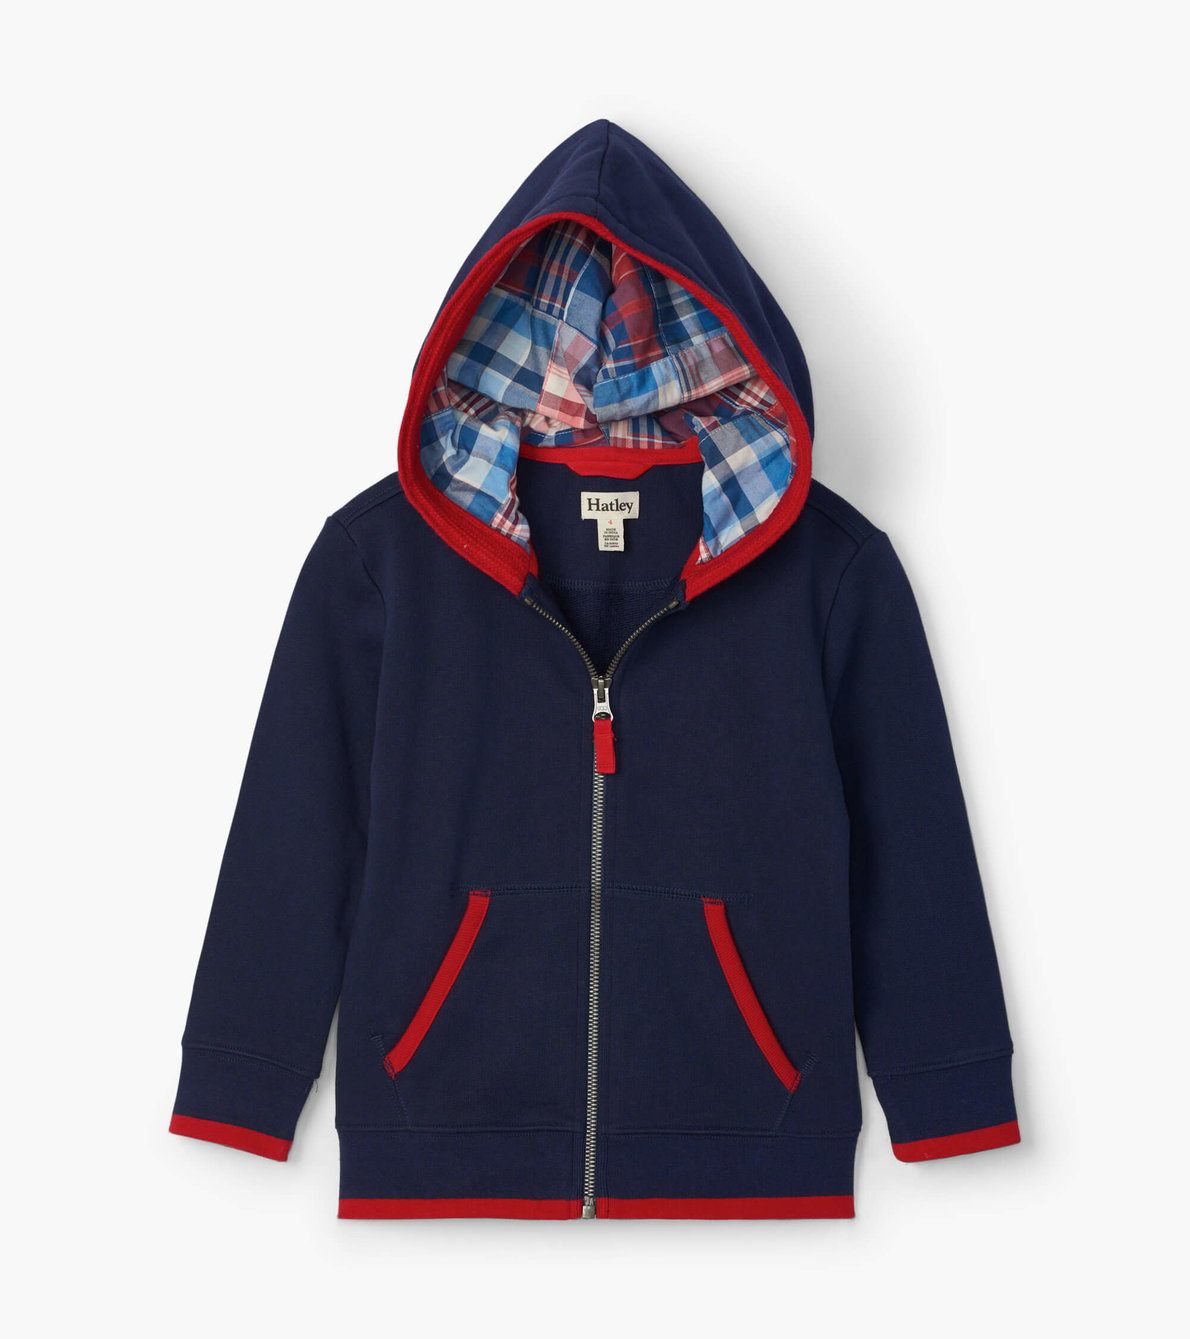 View larger image of Navy Madras Plaid Hoodie